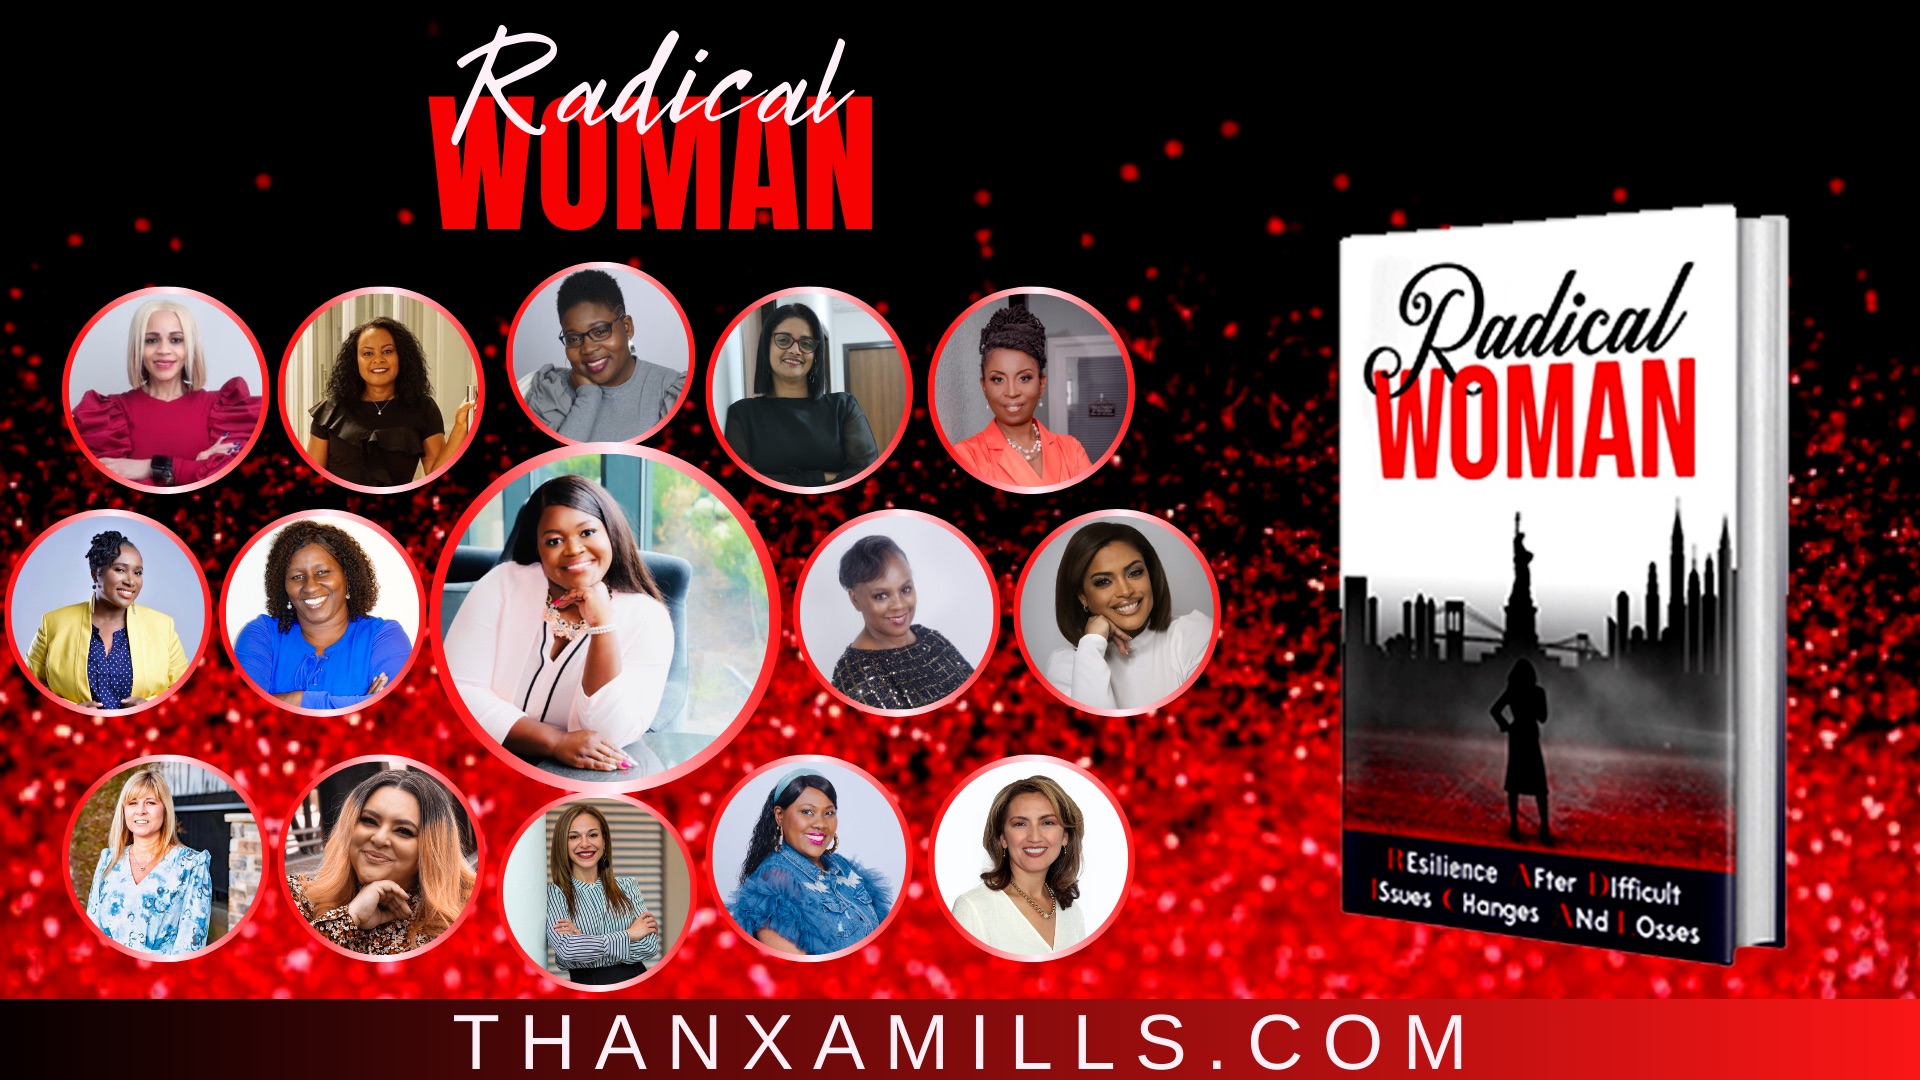 15 Women Launch Women's Empowerment Book titled "Radical Woman: Resilience After Difficult Issues, Changes and Losses"